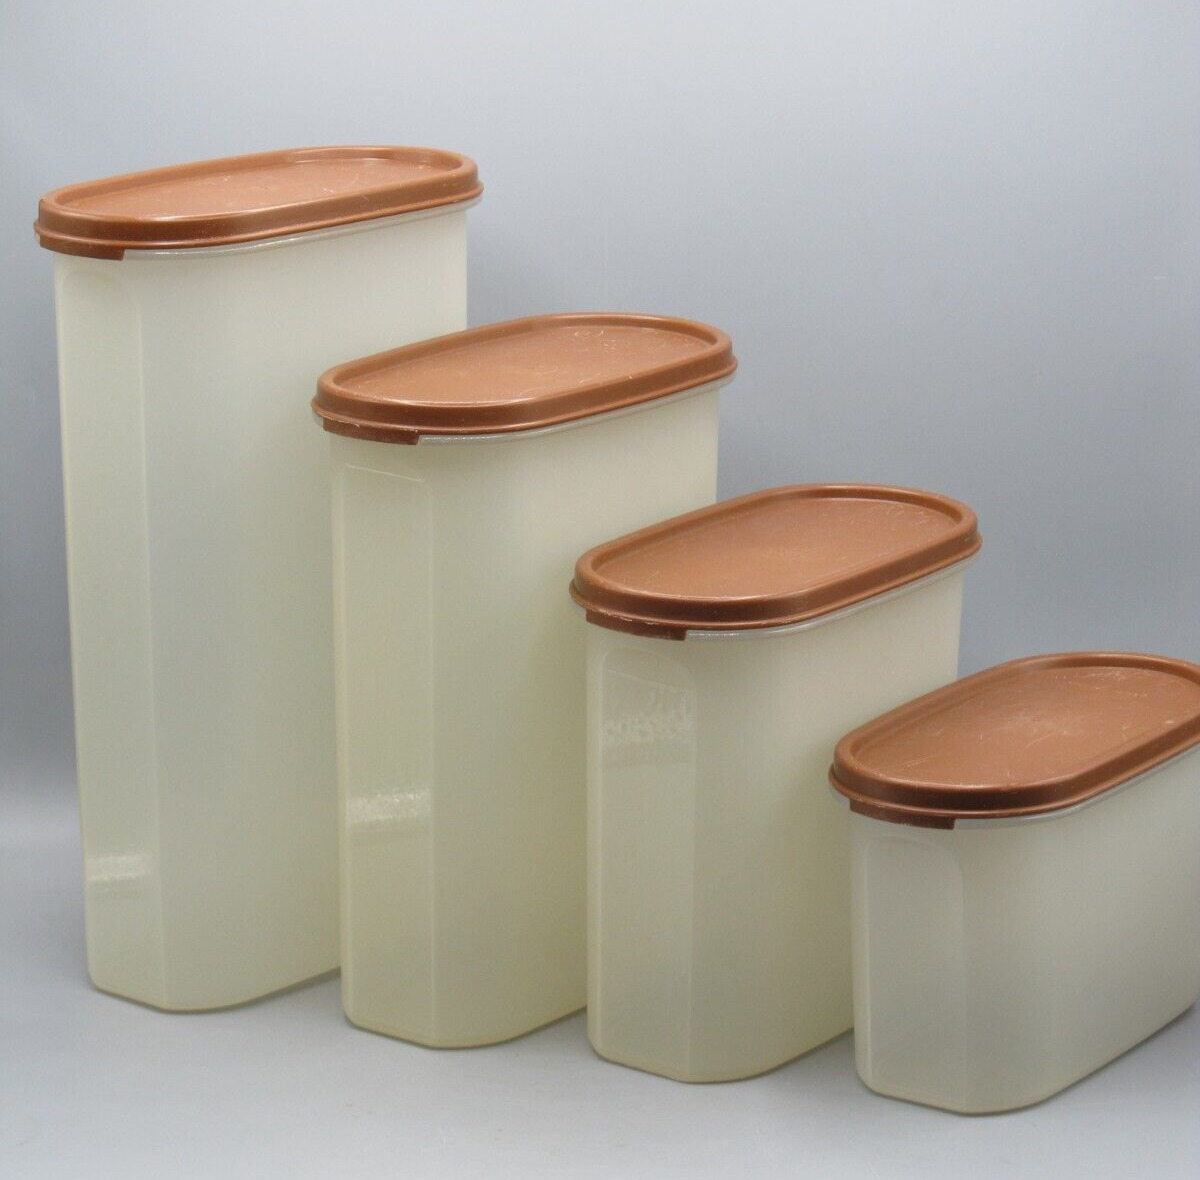 Vintage Tupperware Lot of 4 Modular Mate Containers w/ Brown Lids #2 #3 #4 #5